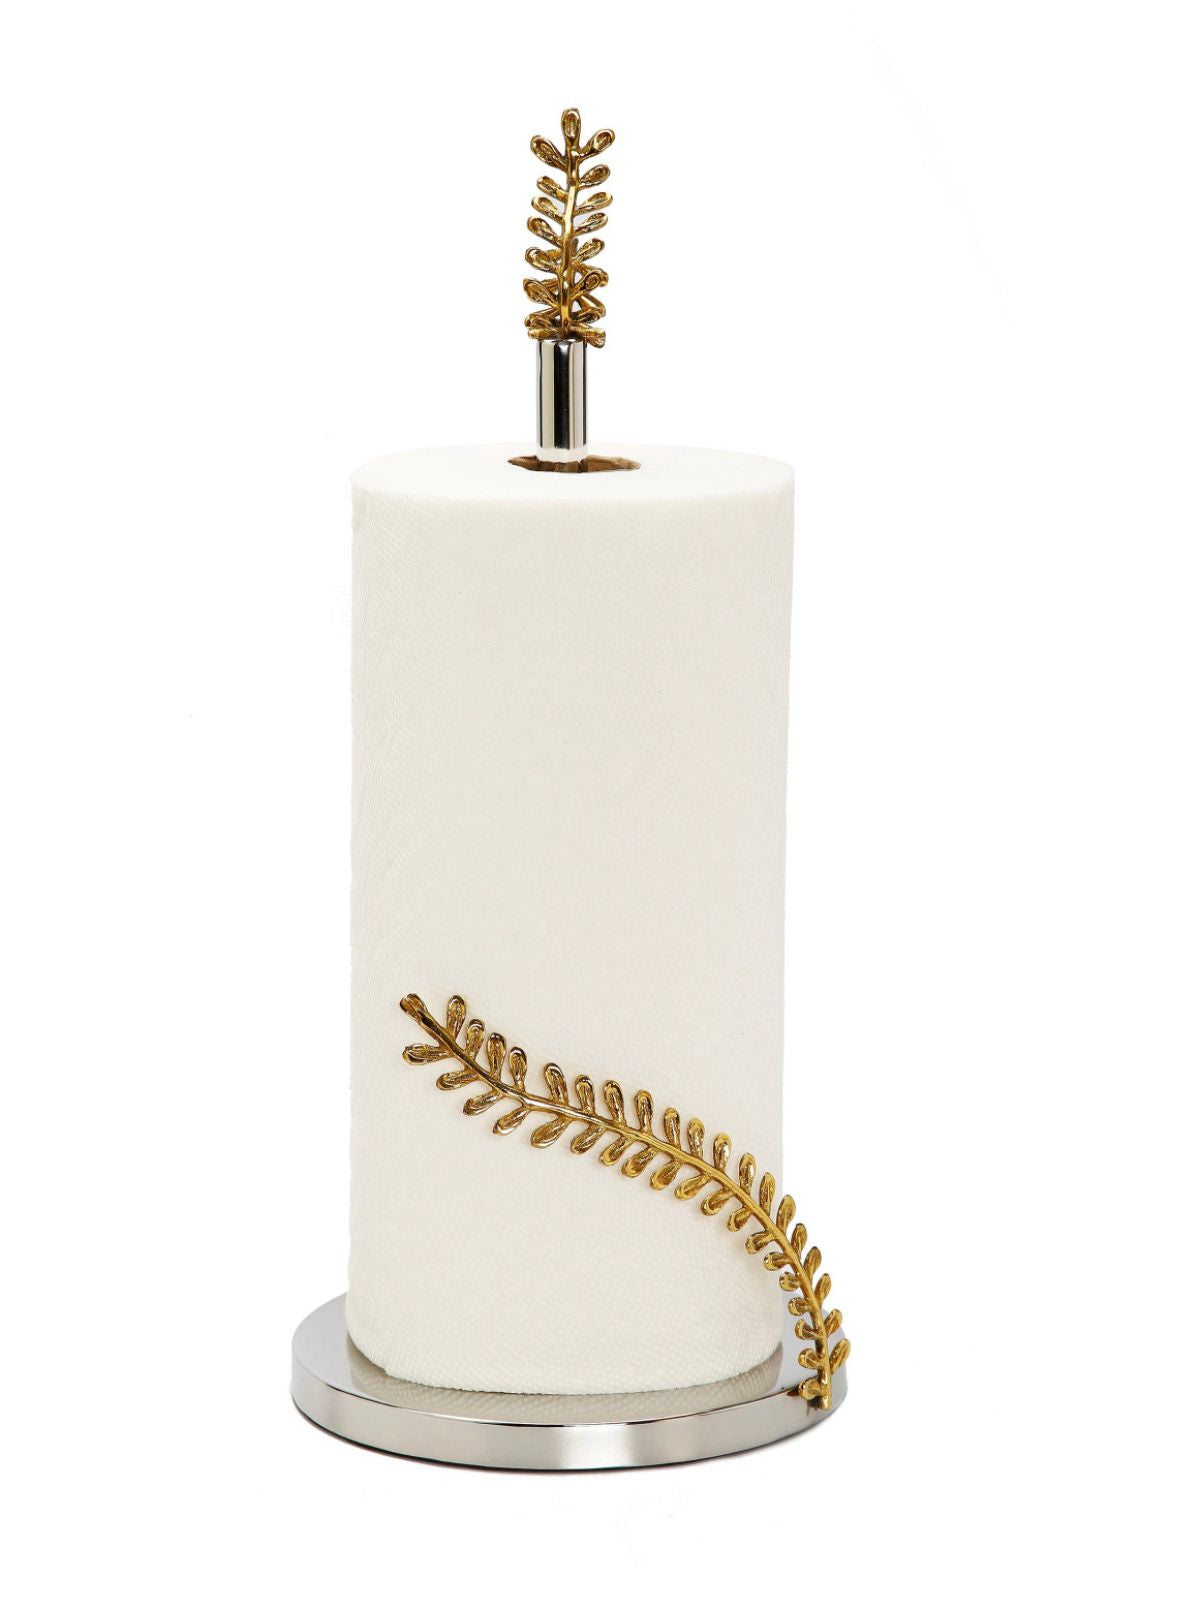 15H Silver Paper Towel Holder With Luxury Gold Brass Leaf Design.